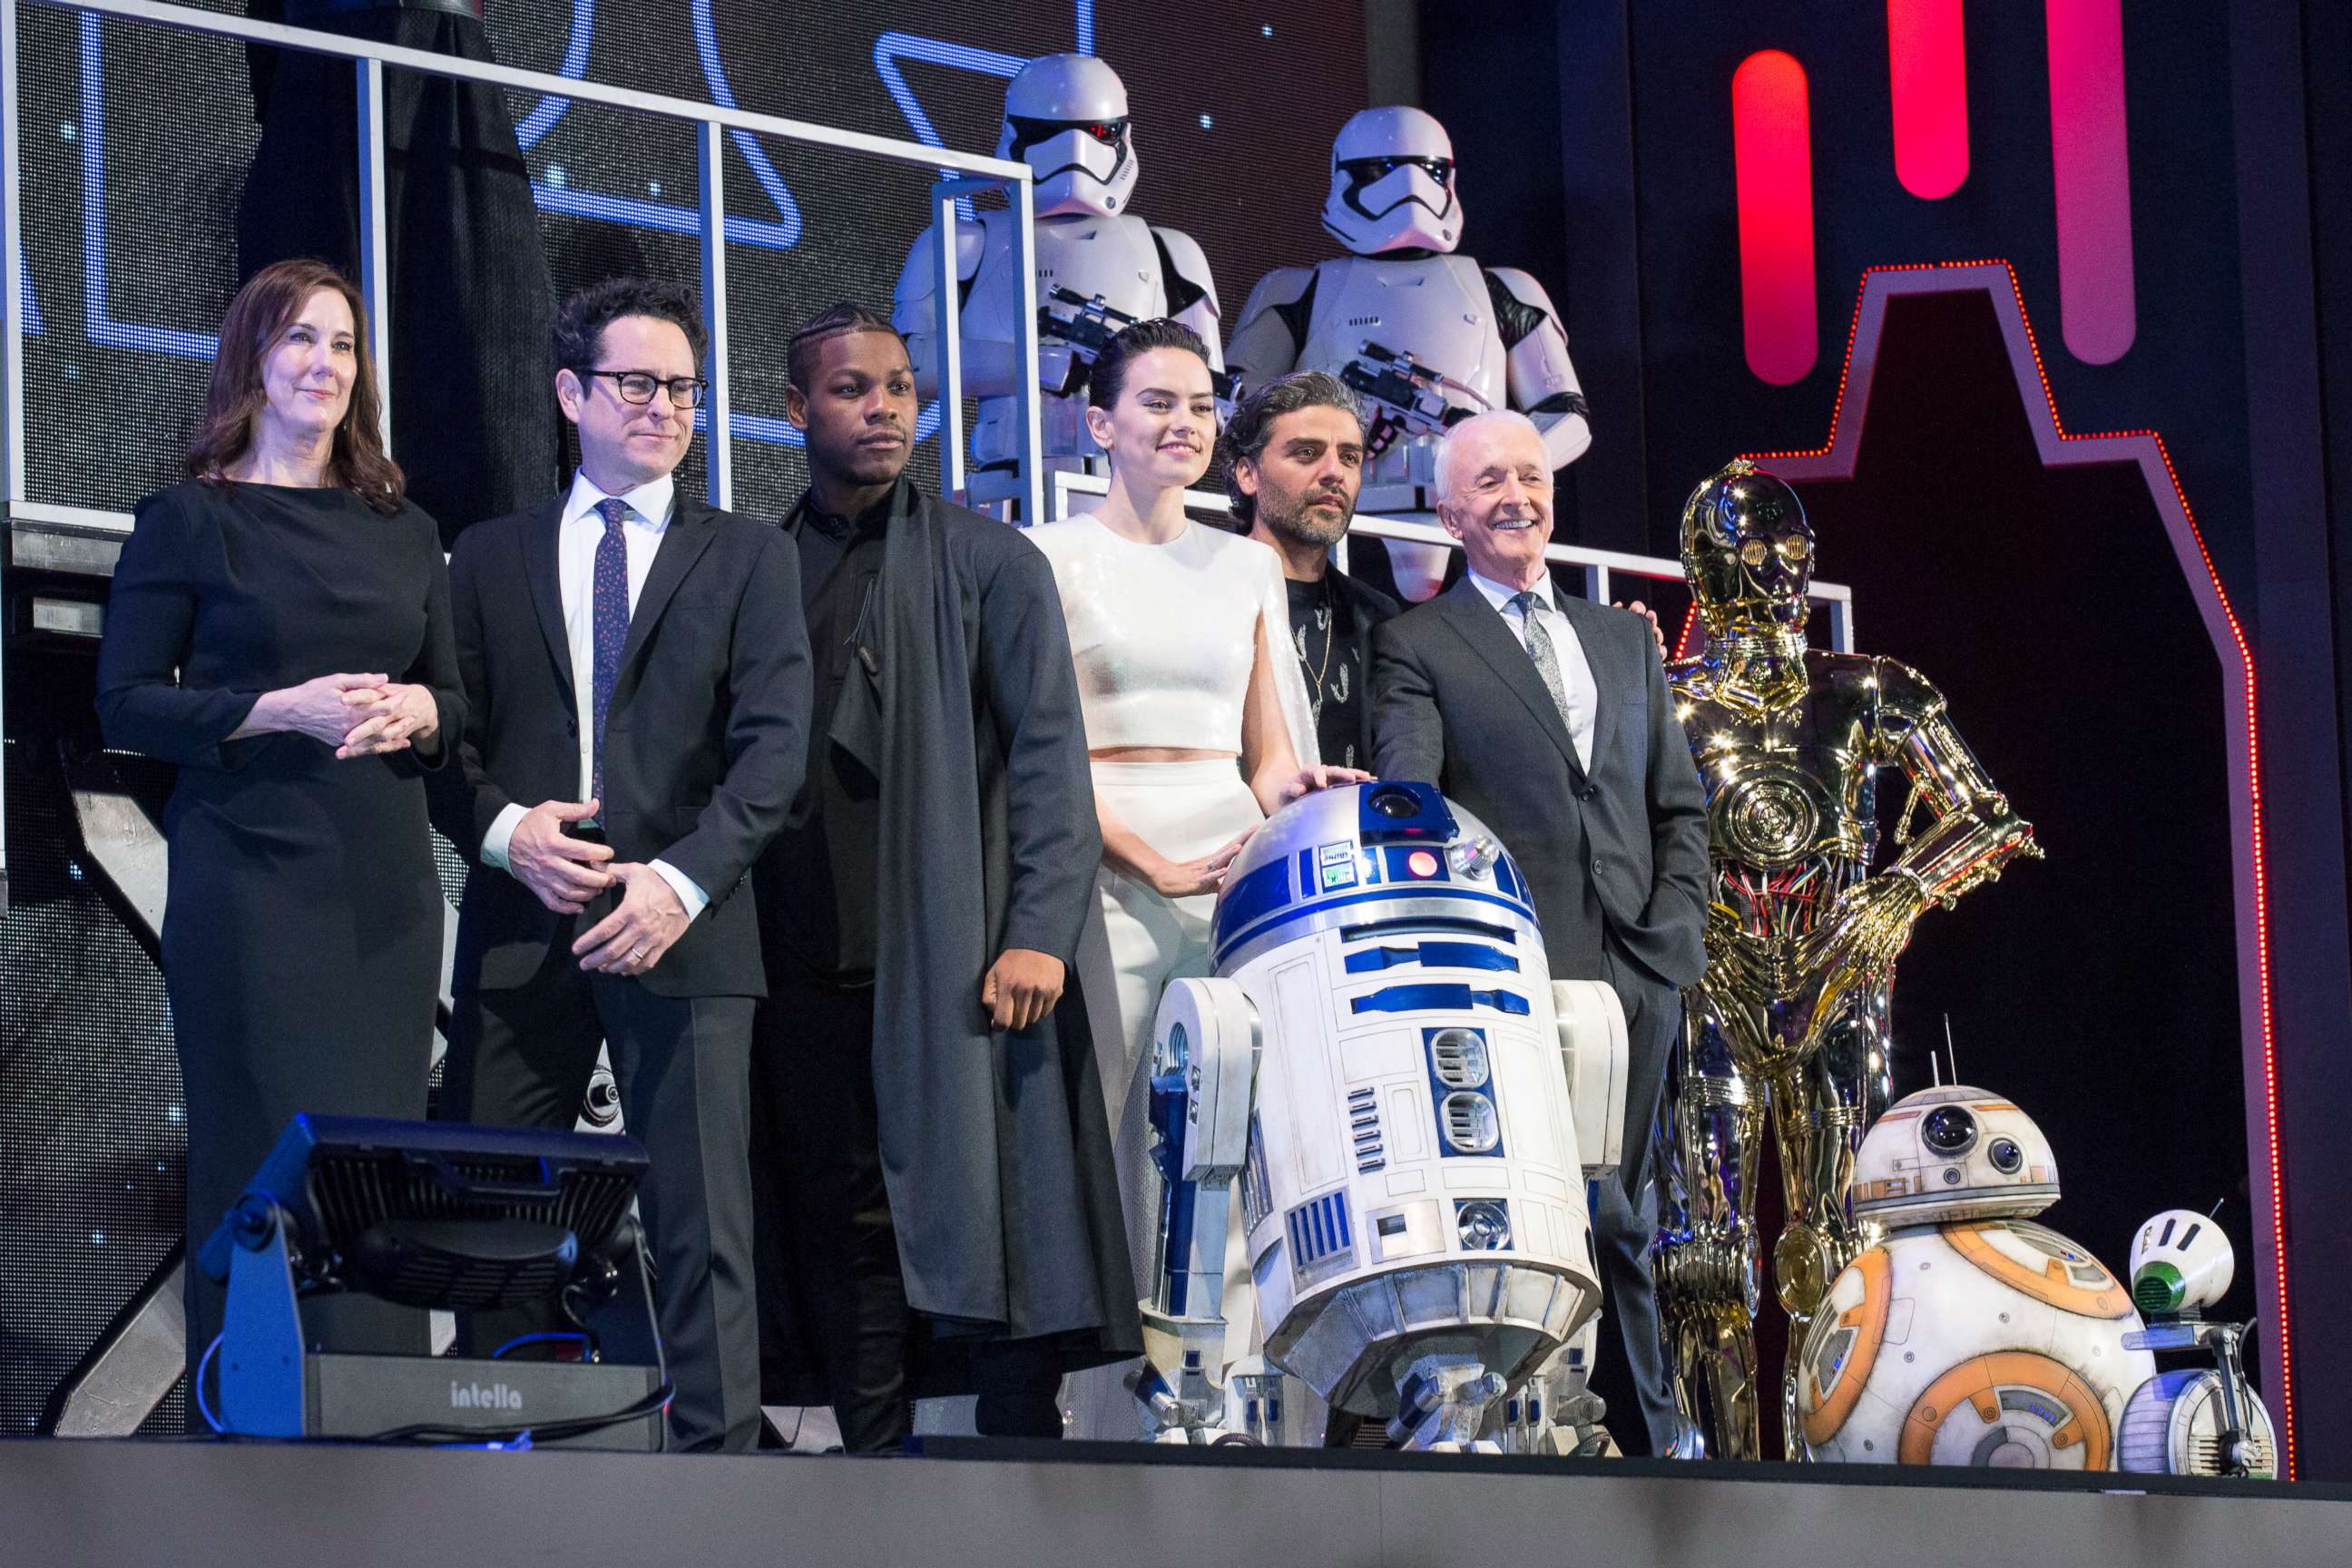 PHOTO: Cast and crew attend a special fan event for 'Star Wars: The Rise of Skywalker' at Roppongi Hills, Dec. 11, 2019, in Tokyo, Japan.